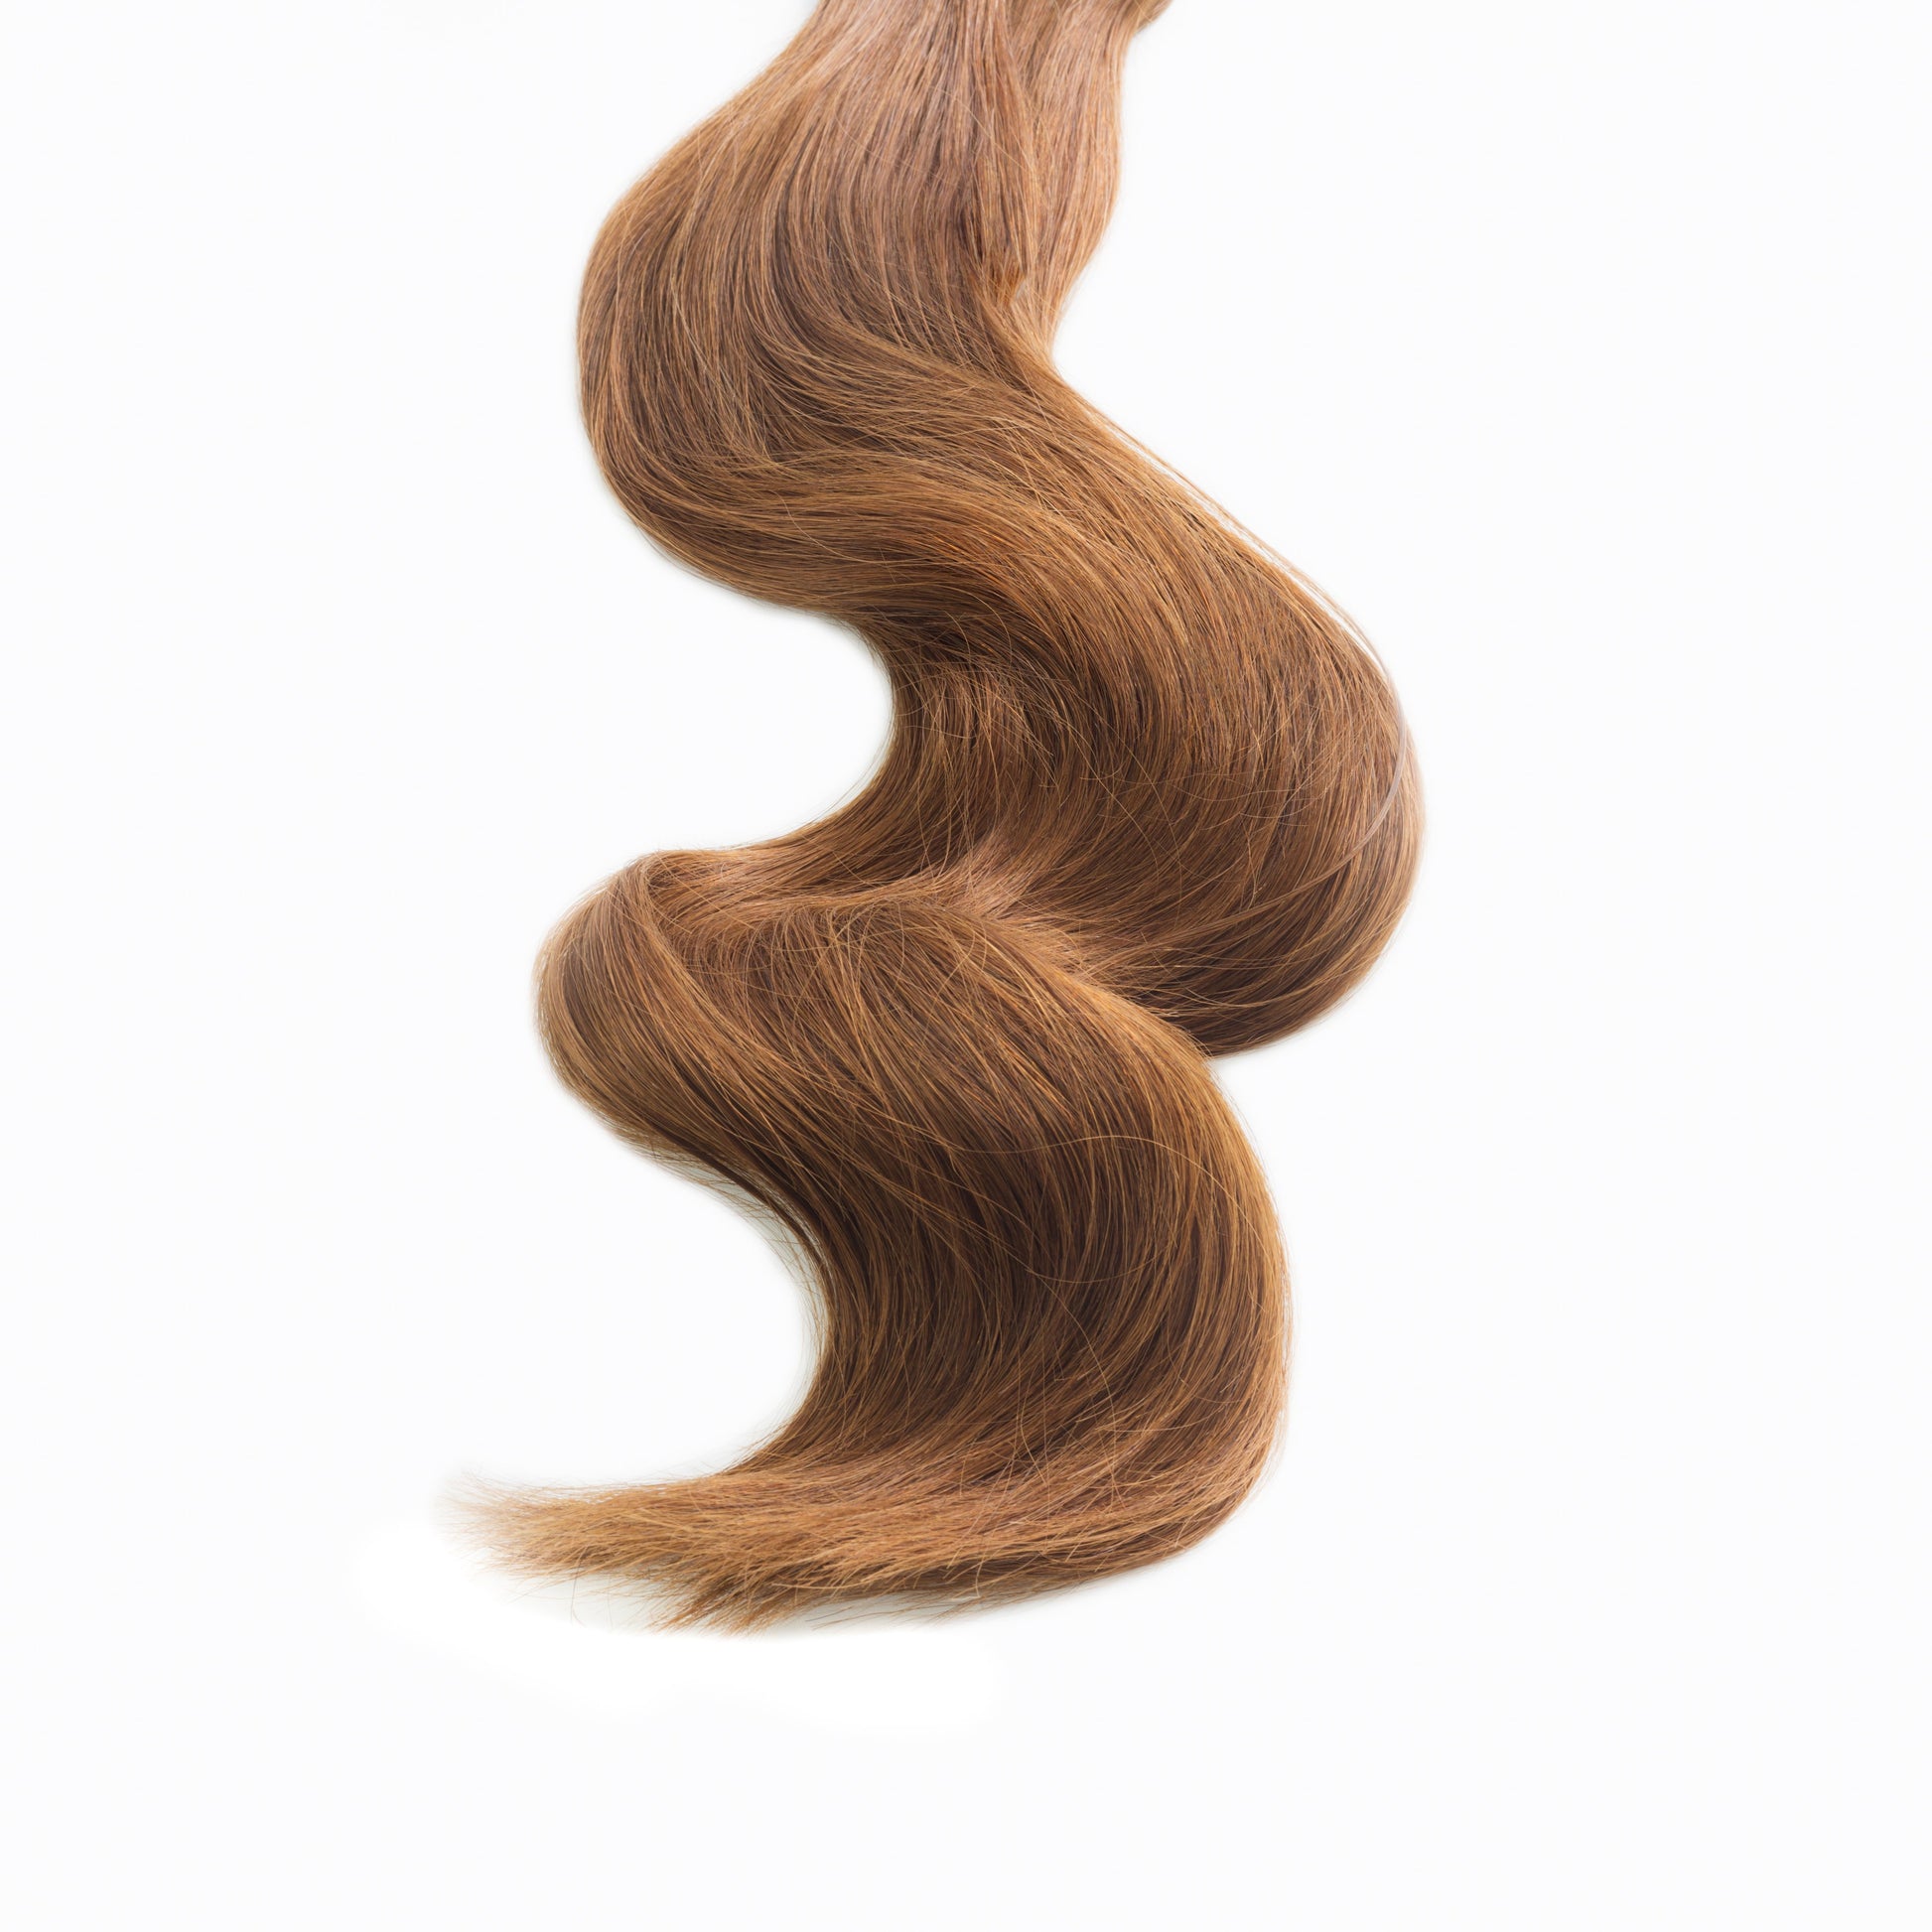 golden brown #6 tape hair extensions 4 remi human hair minque hair extensions